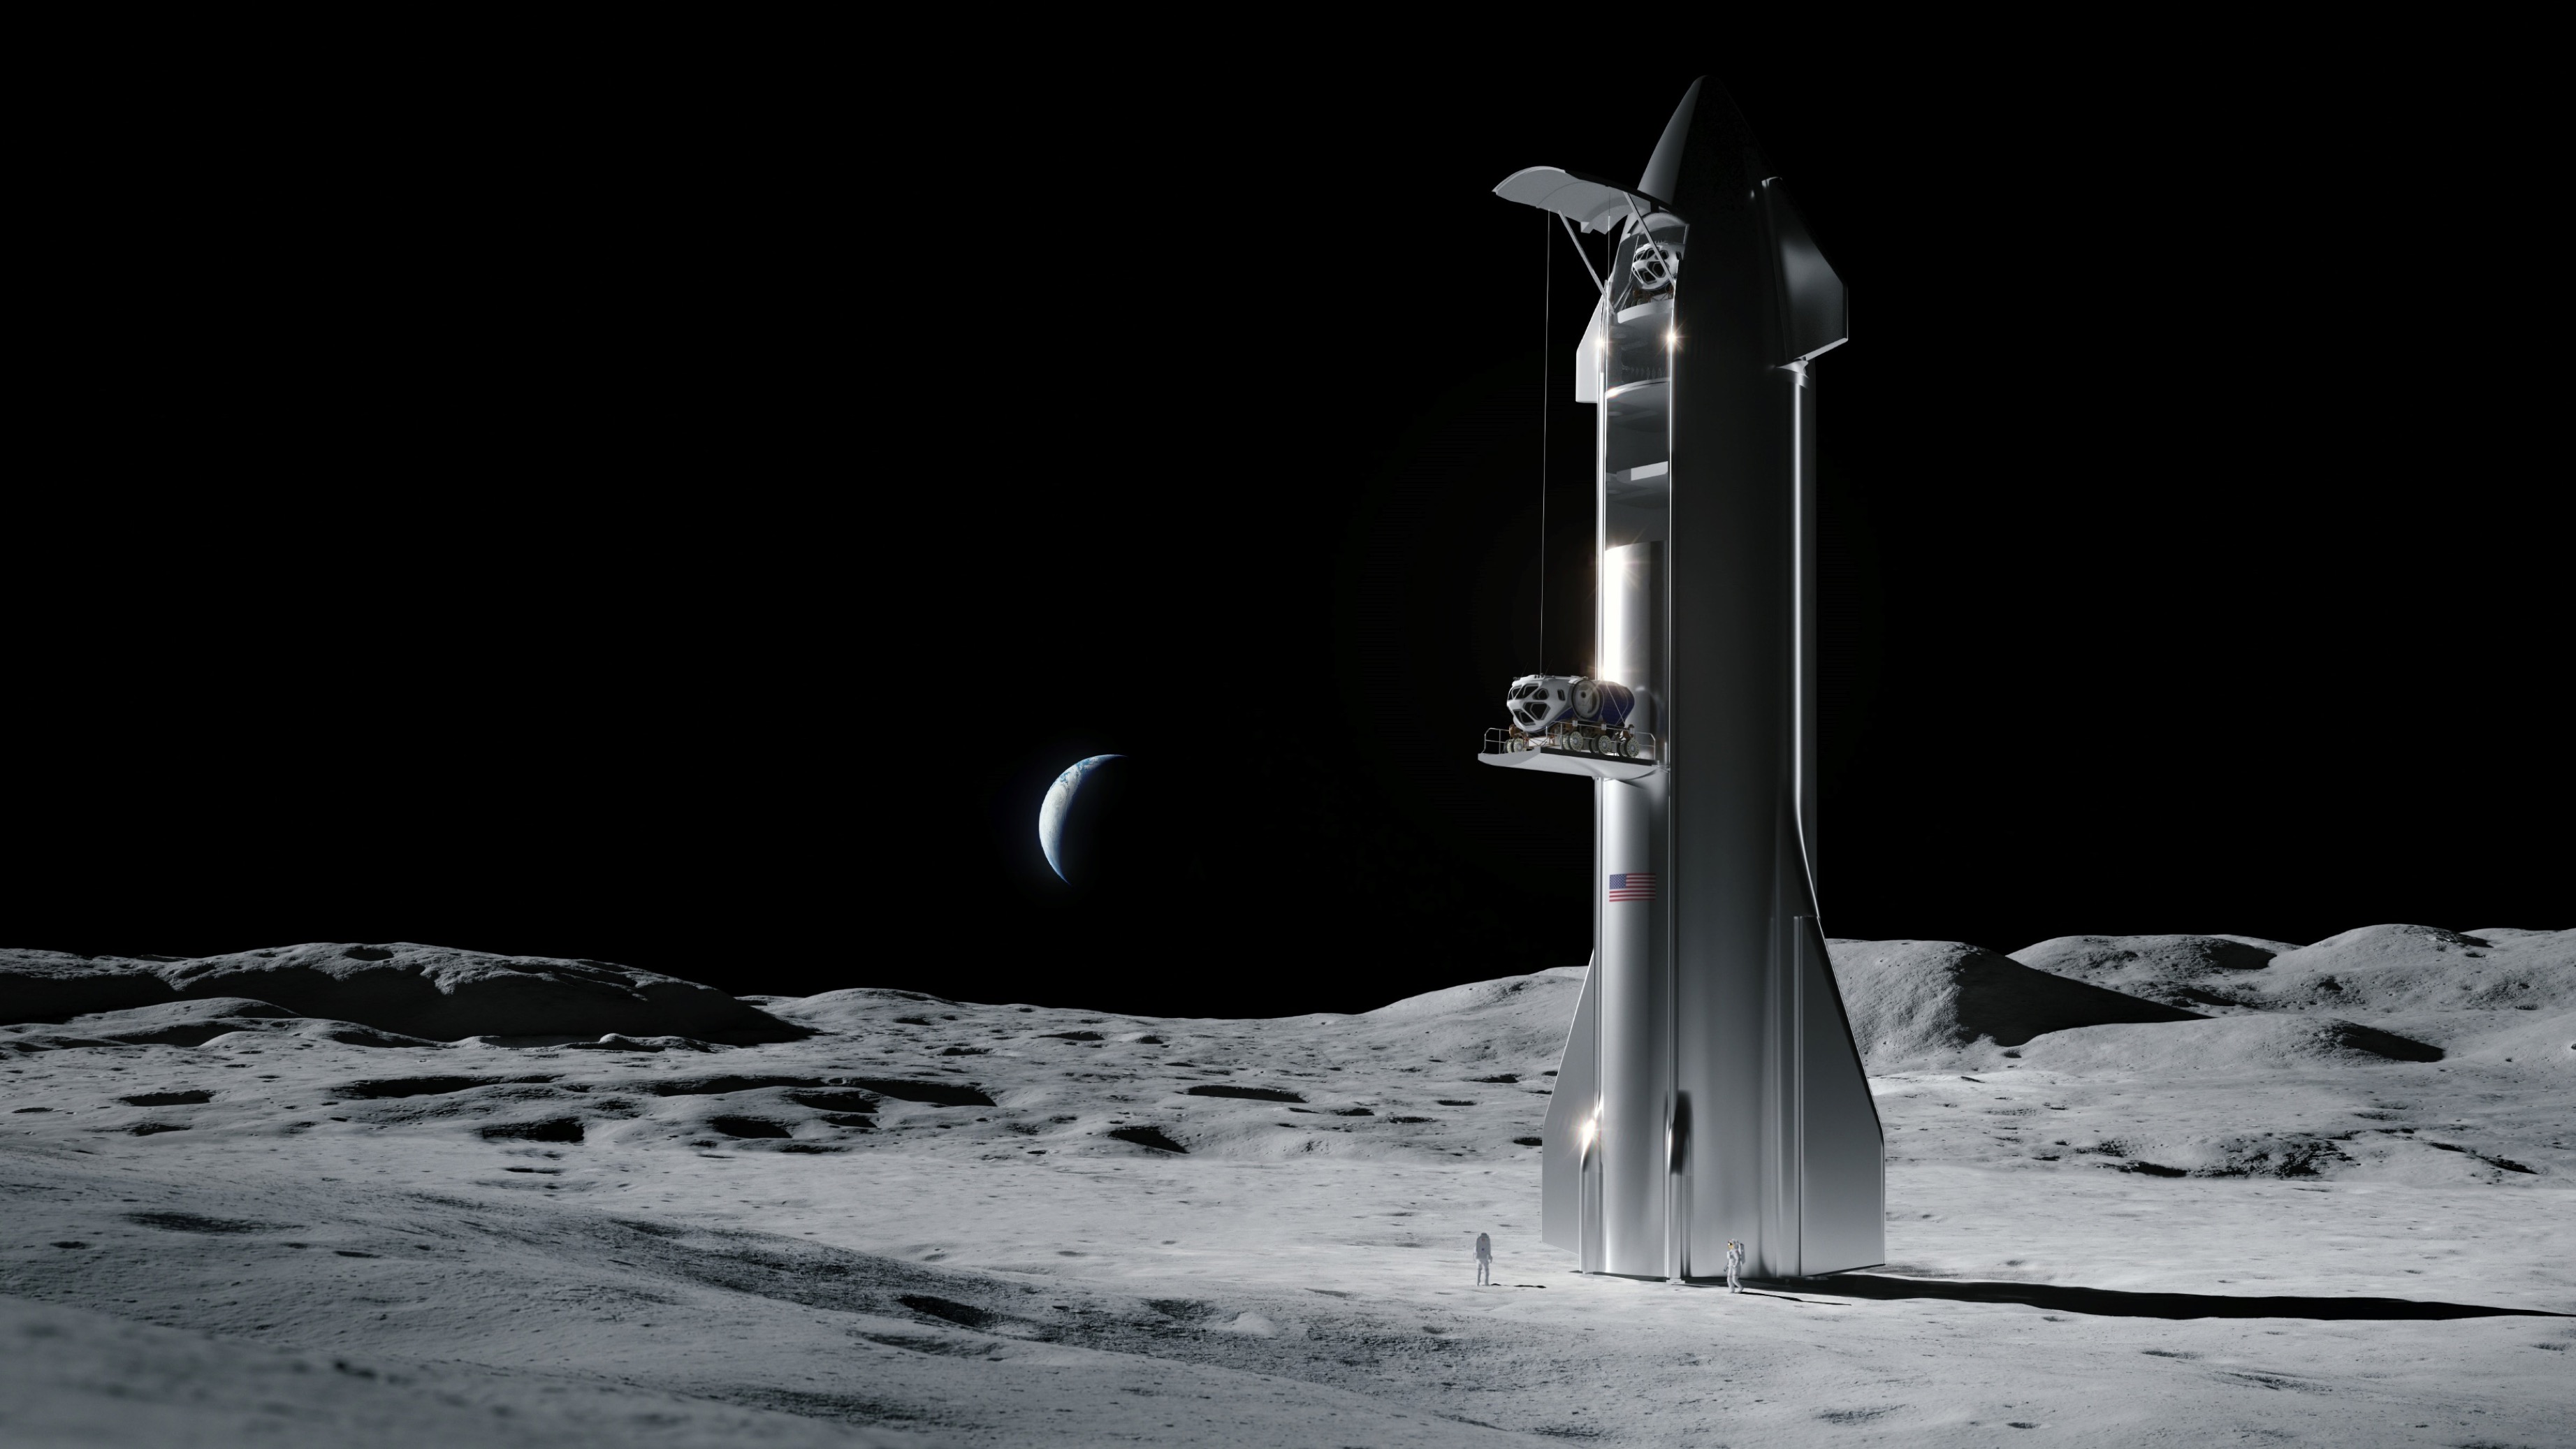 Artist's illustration of the SpaceX spacecraft on the Moon.